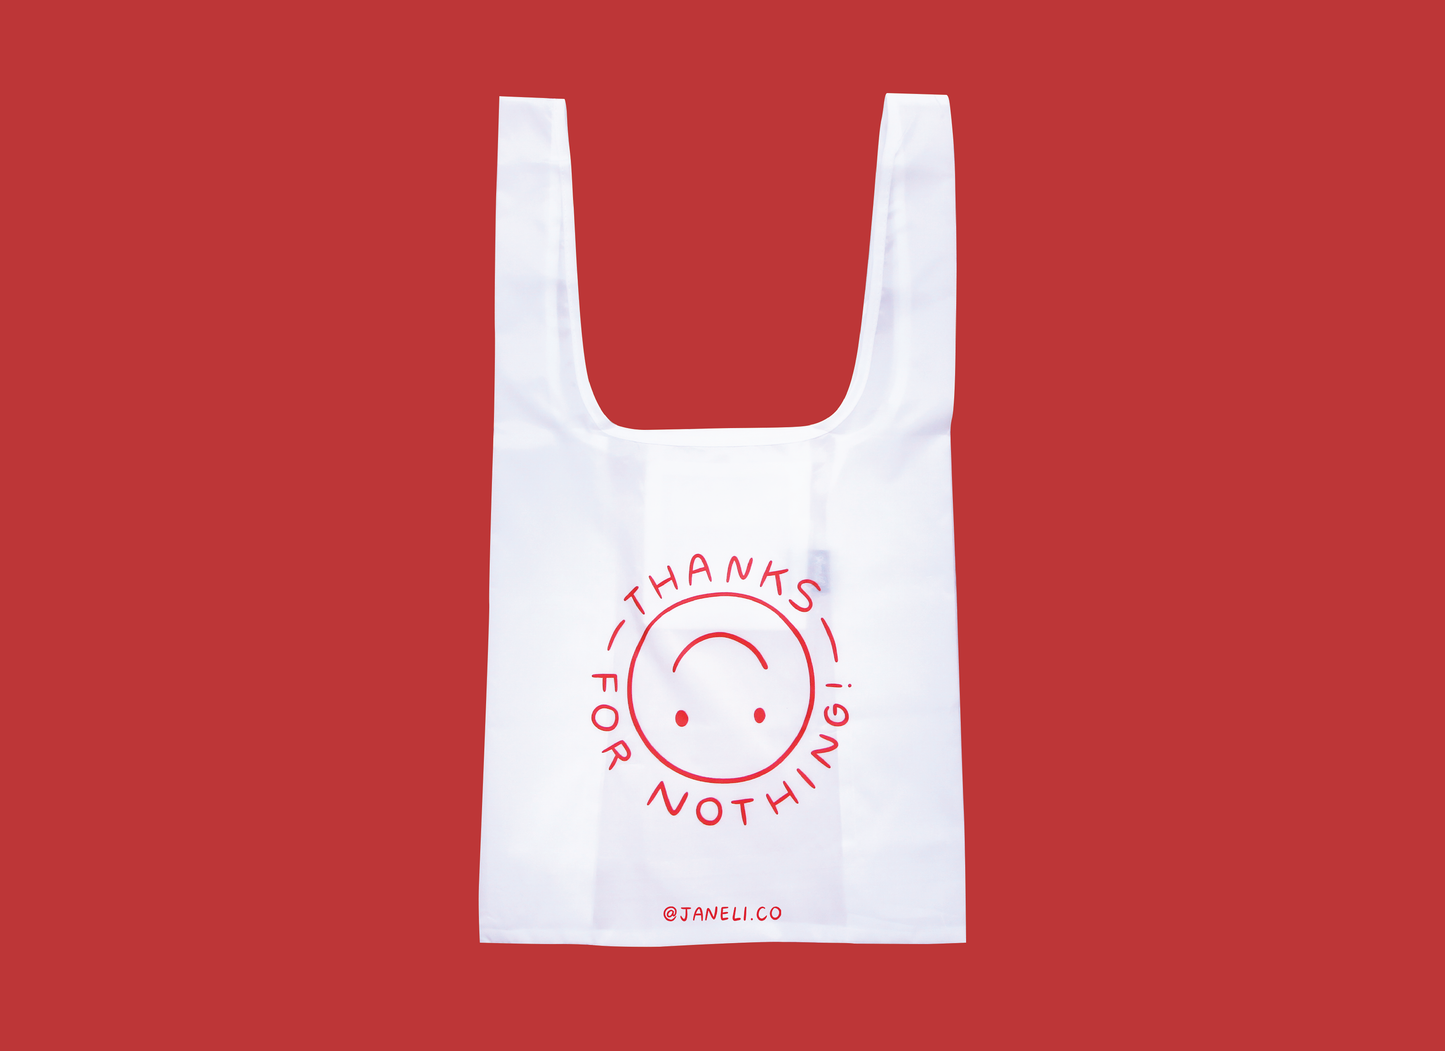 A photo of a white foldable grocery bag with an upside down smiley face that says "Thanks for nothing" over a red background.